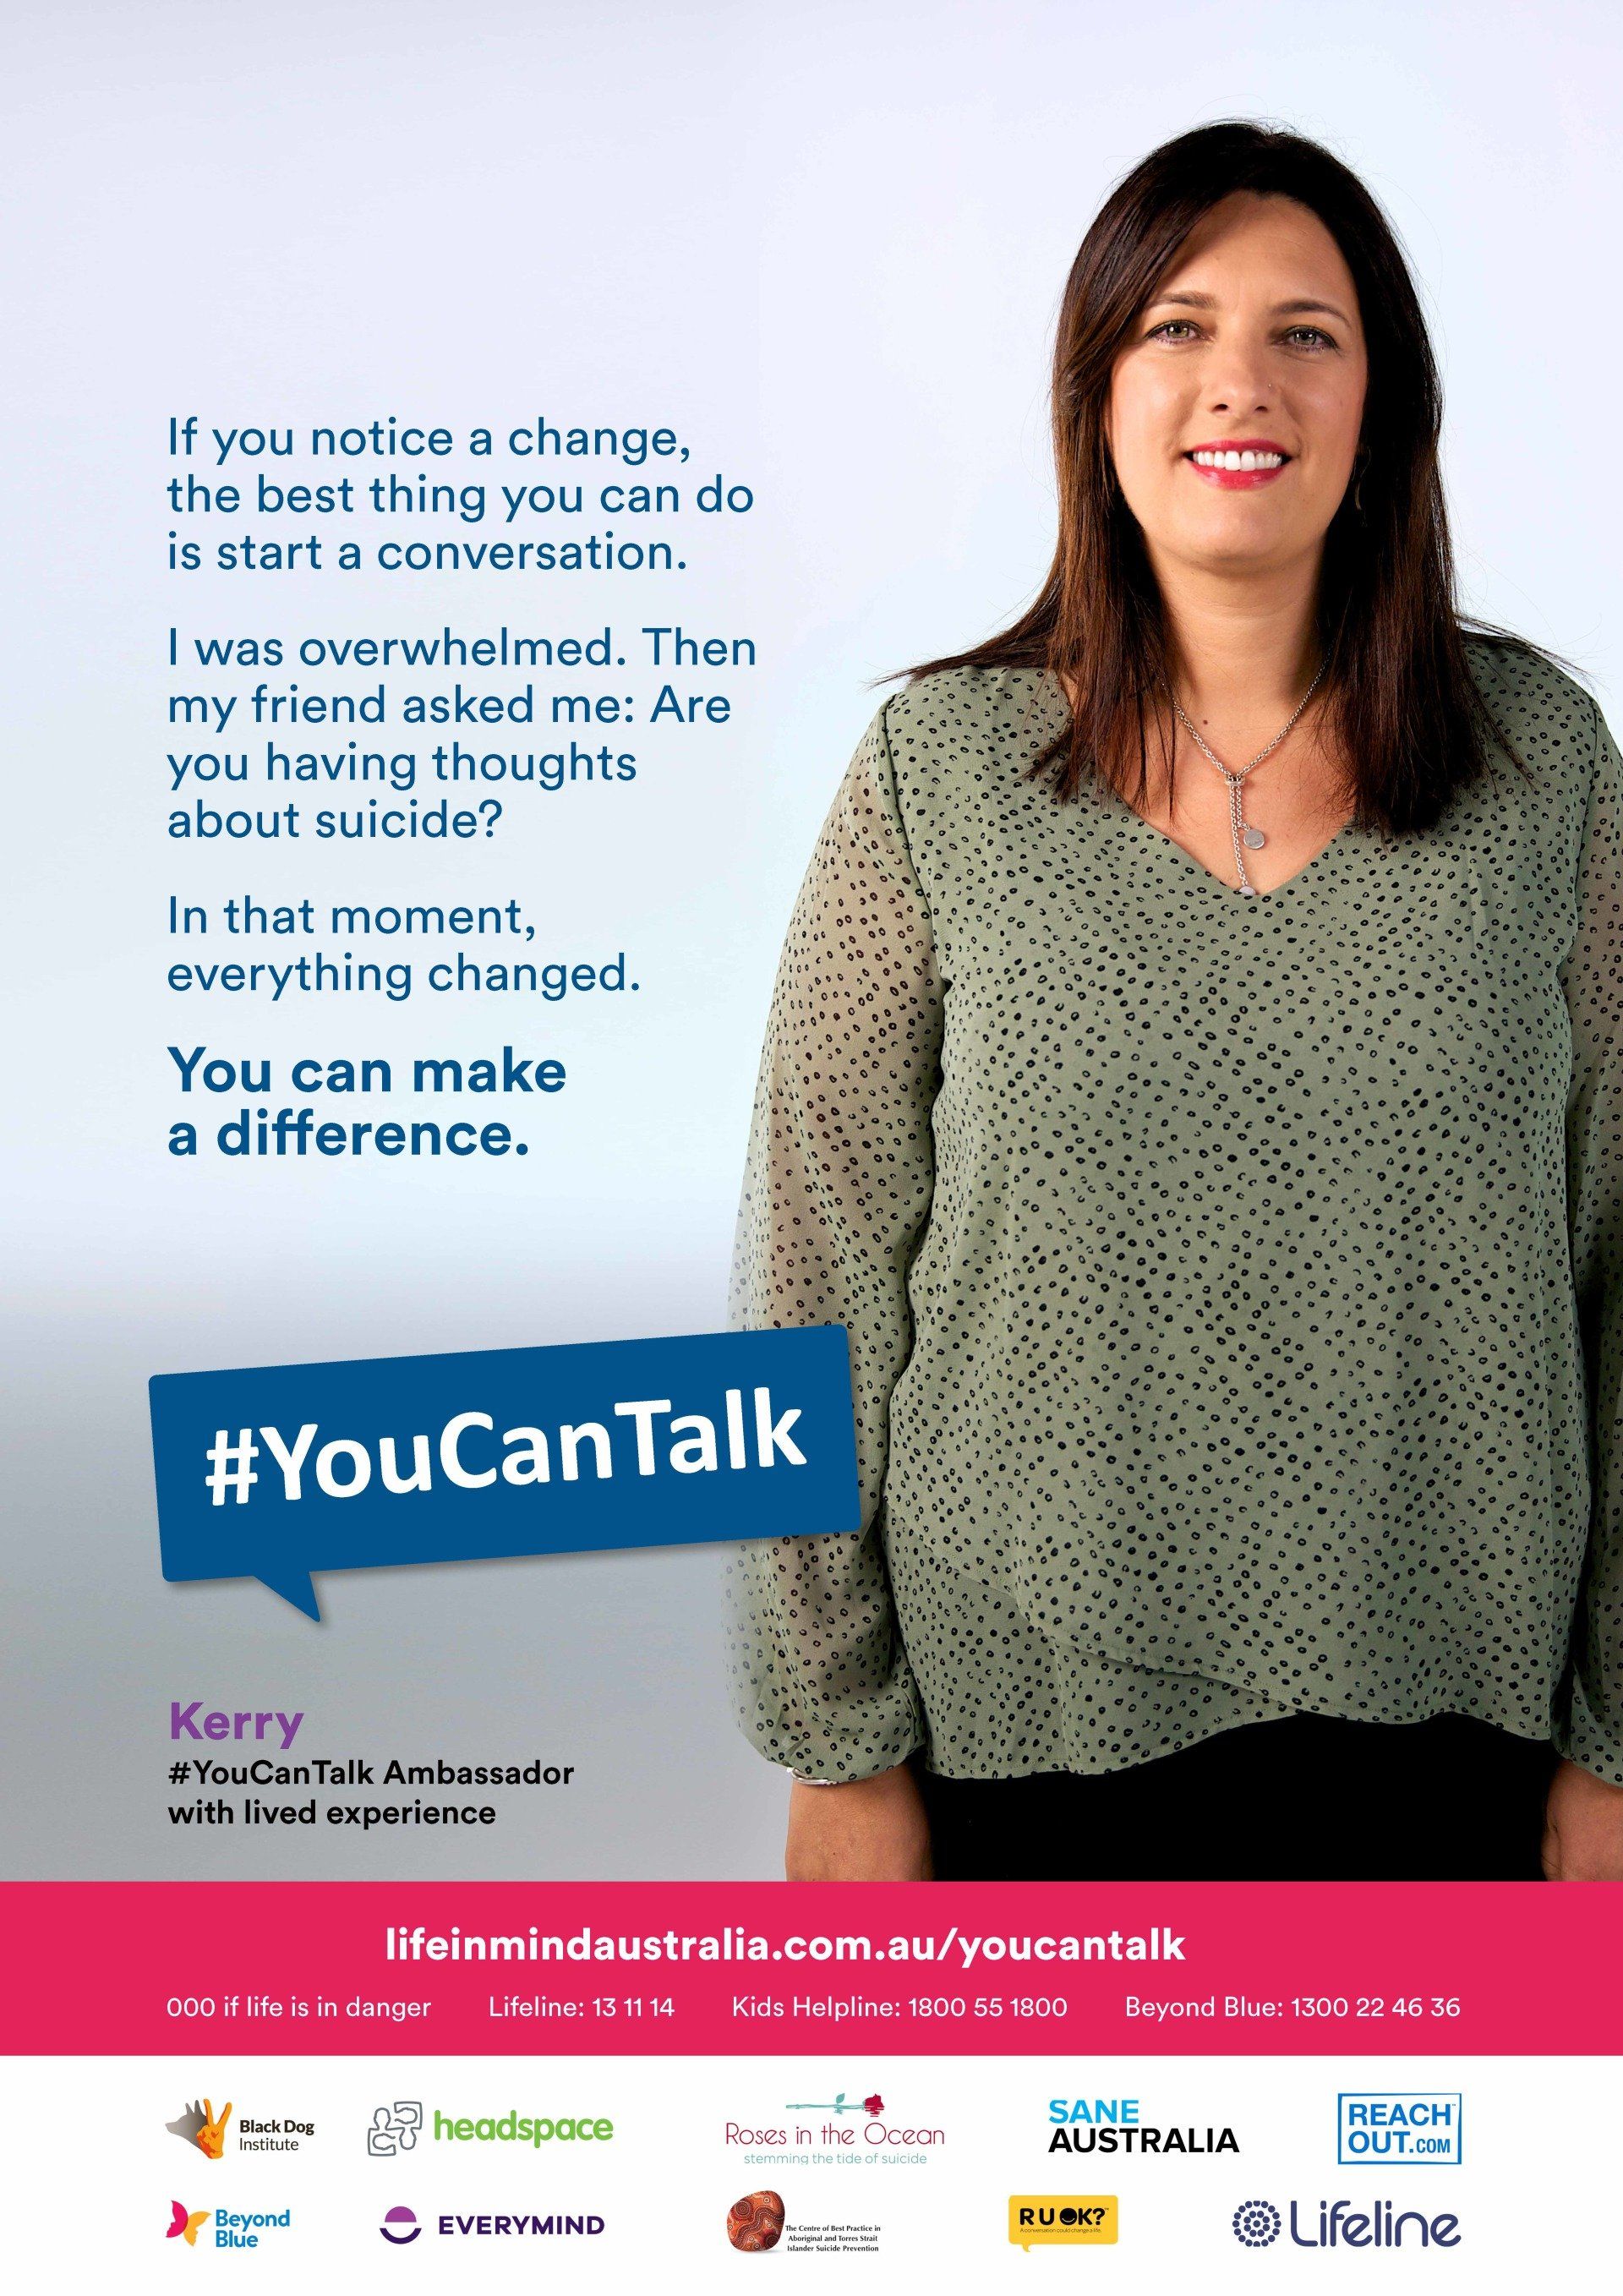 You can talk campaign poster - woman smiling ( Kerry)